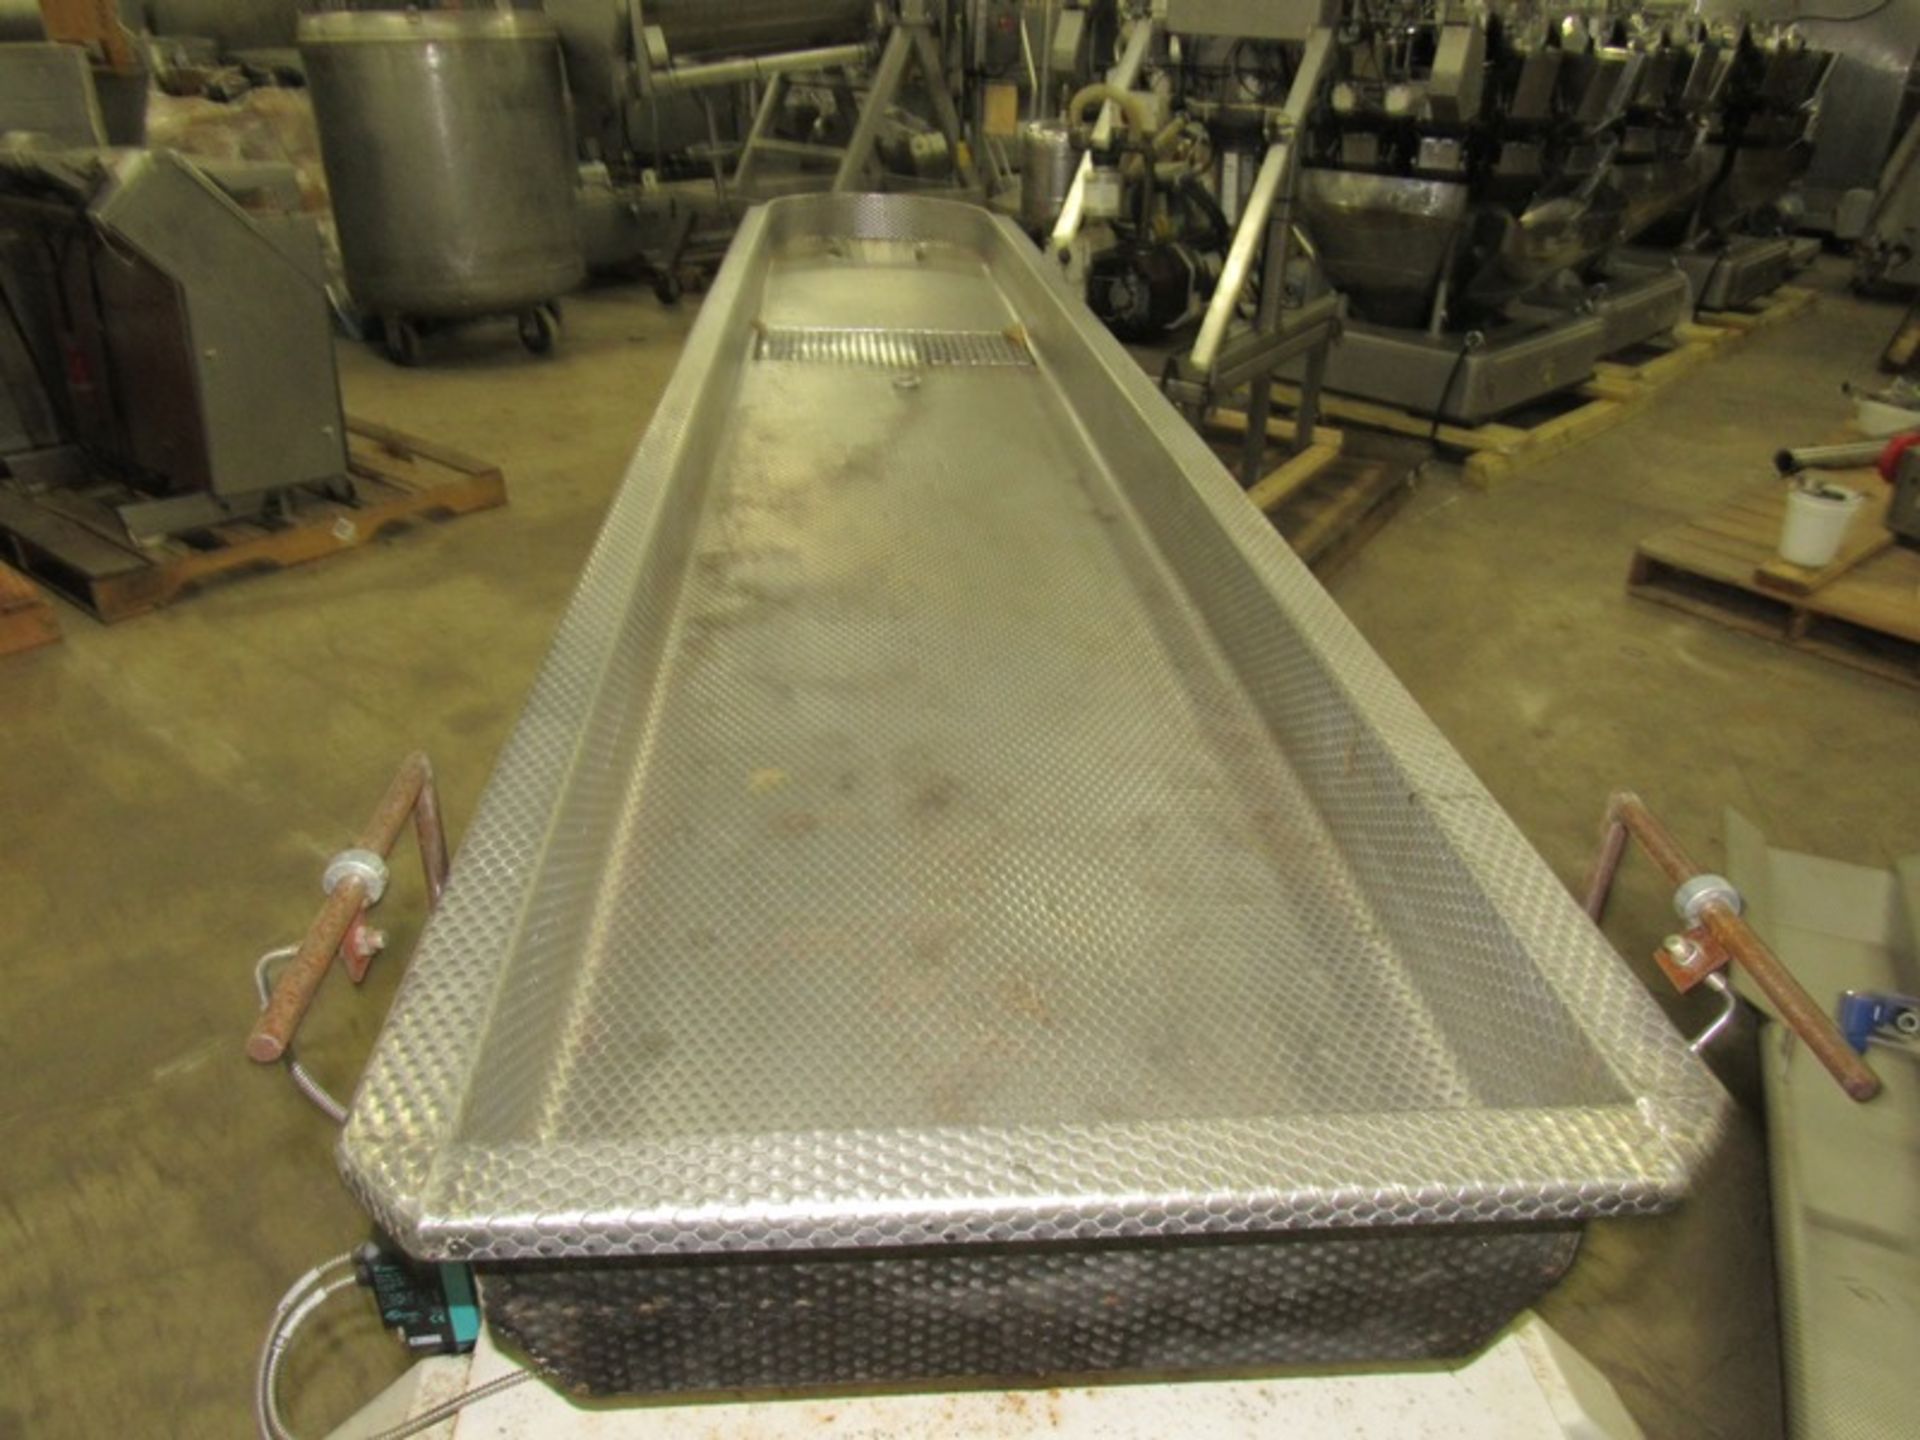 Smalley Mdl. EMC2t Vibratory Conveyor, dimpled stainless steel tray, 18" W X 115" L X 4" D, 9" - Image 4 of 6